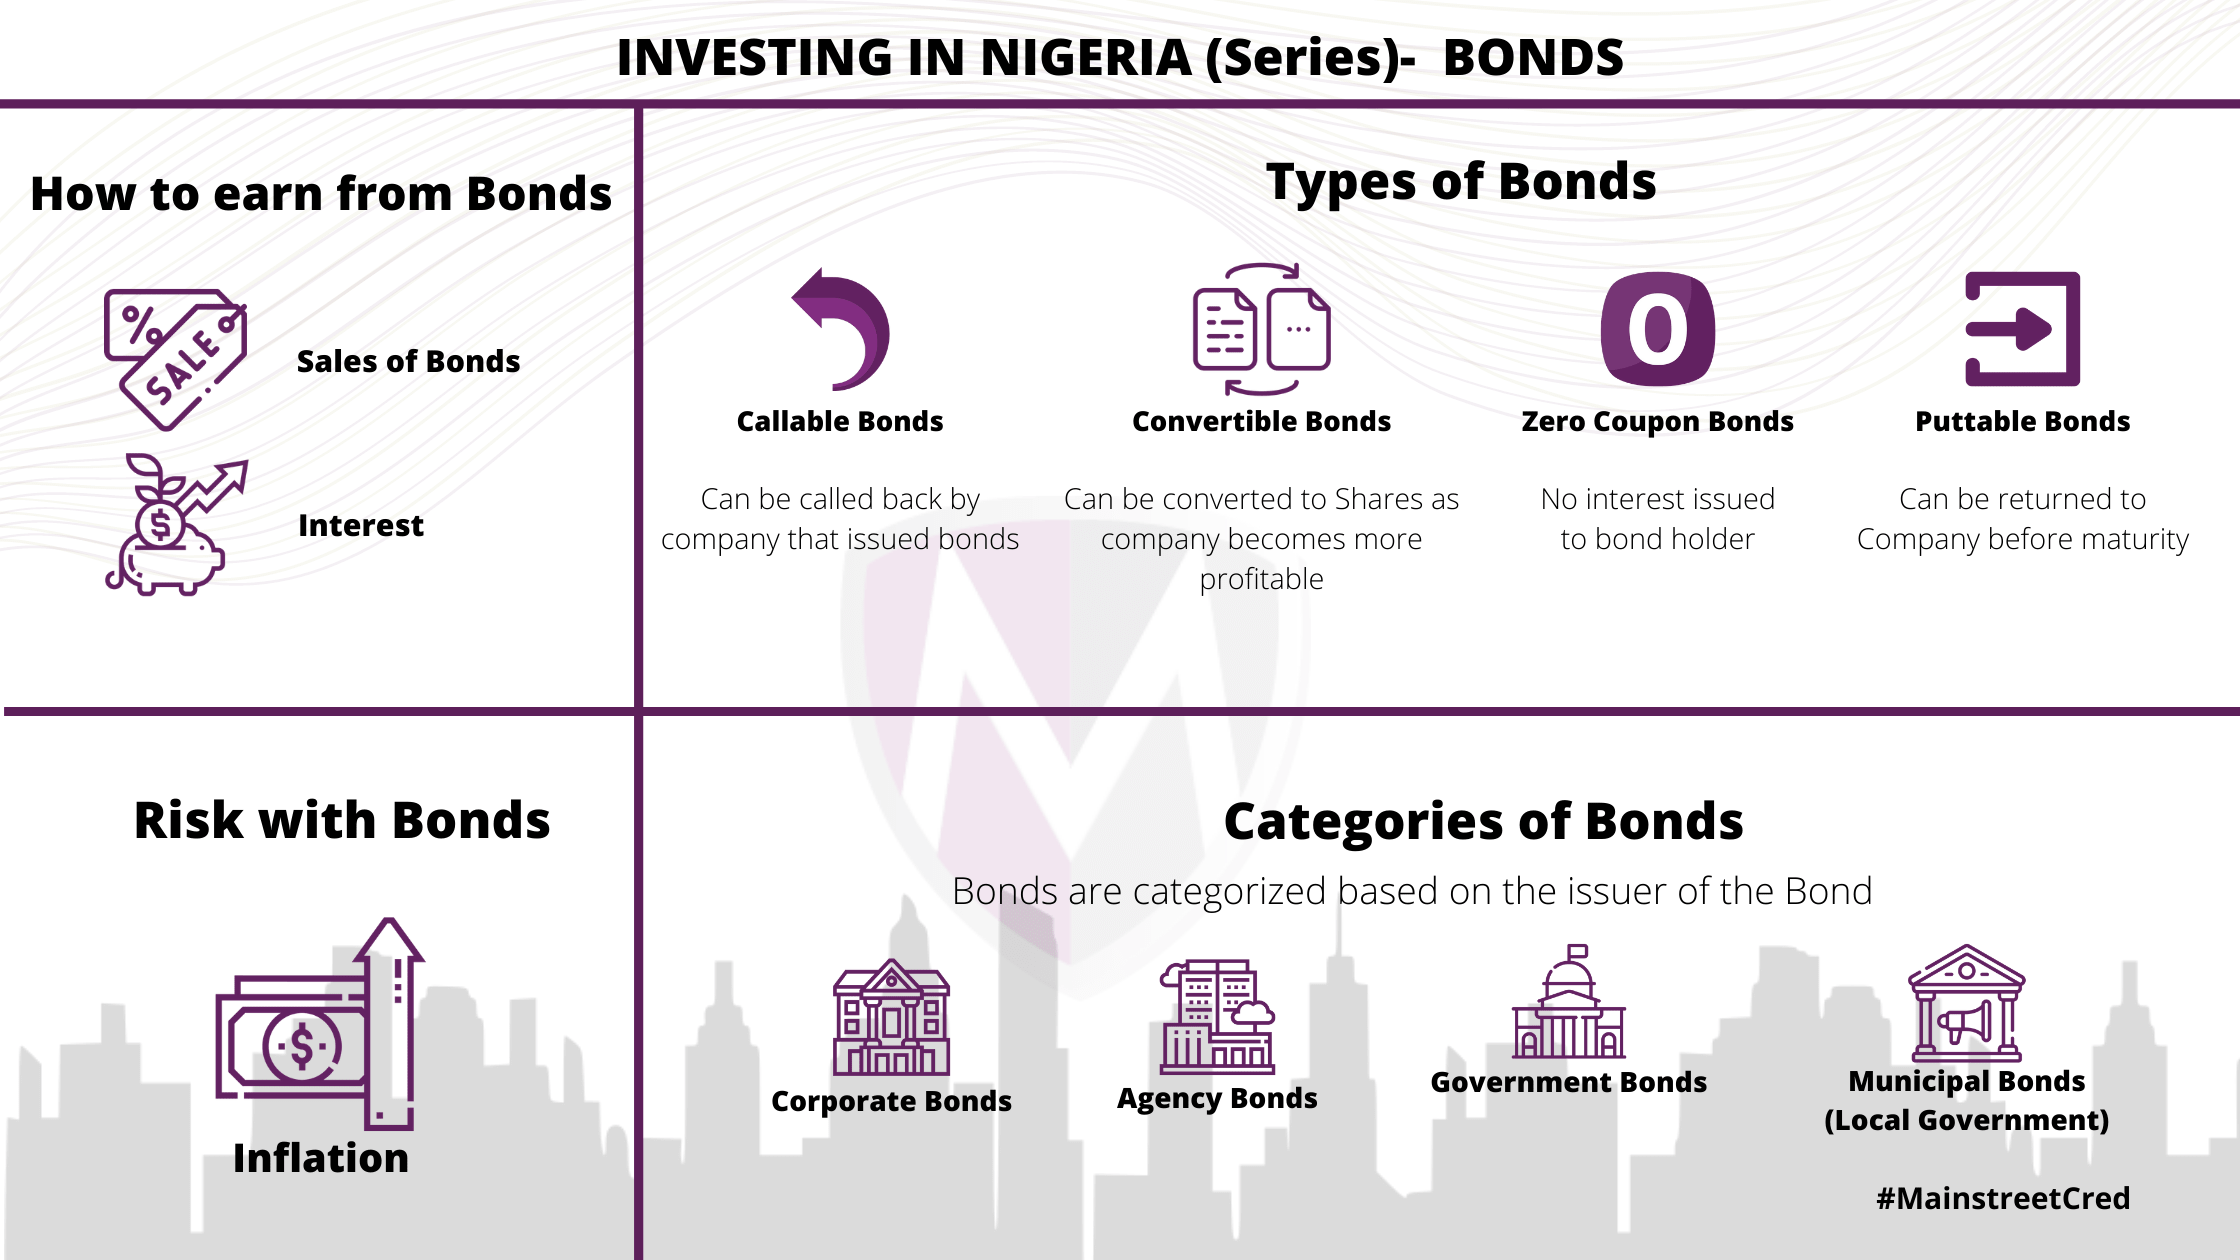 Infographic explaining bonds, categories of bonds, how to earn from bonds, types of bonds and the risks in bonds